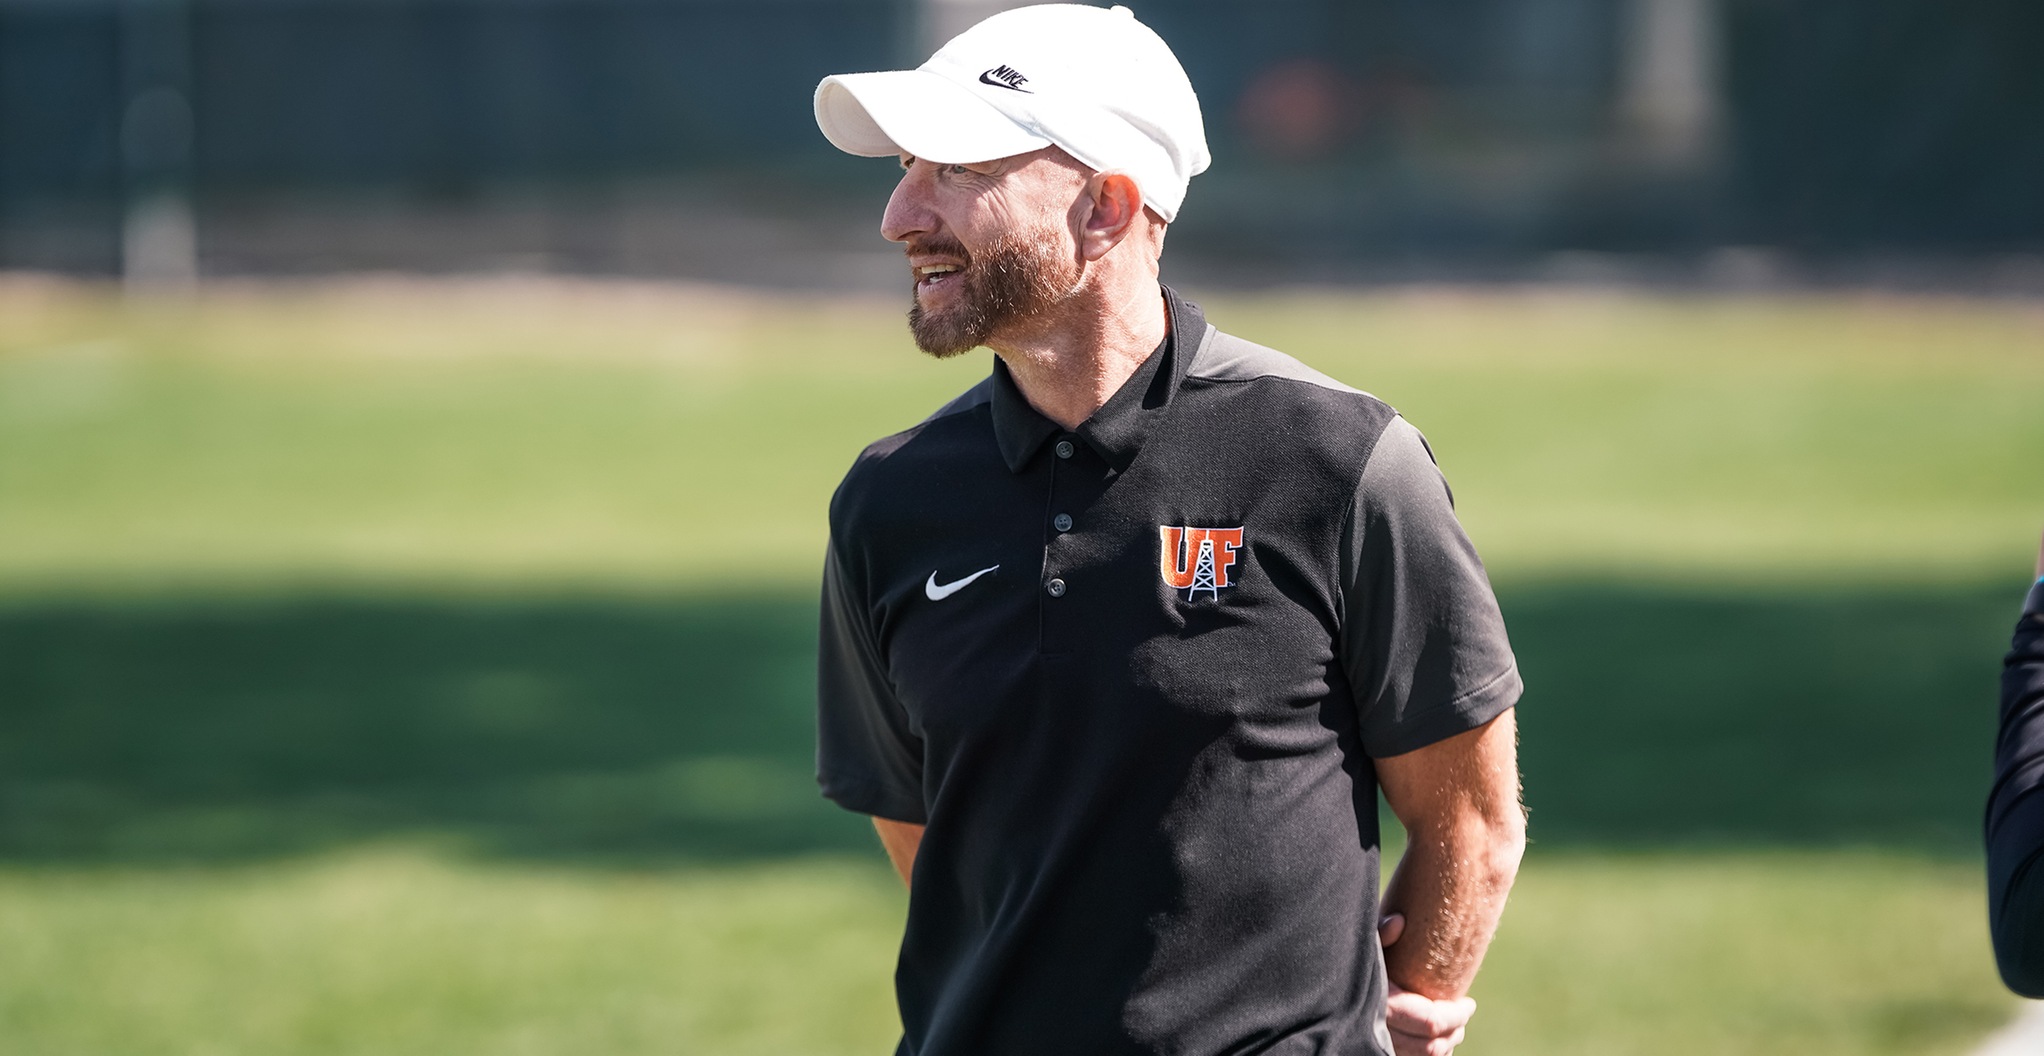 Walker Resigns | Accepts Head Position at BG